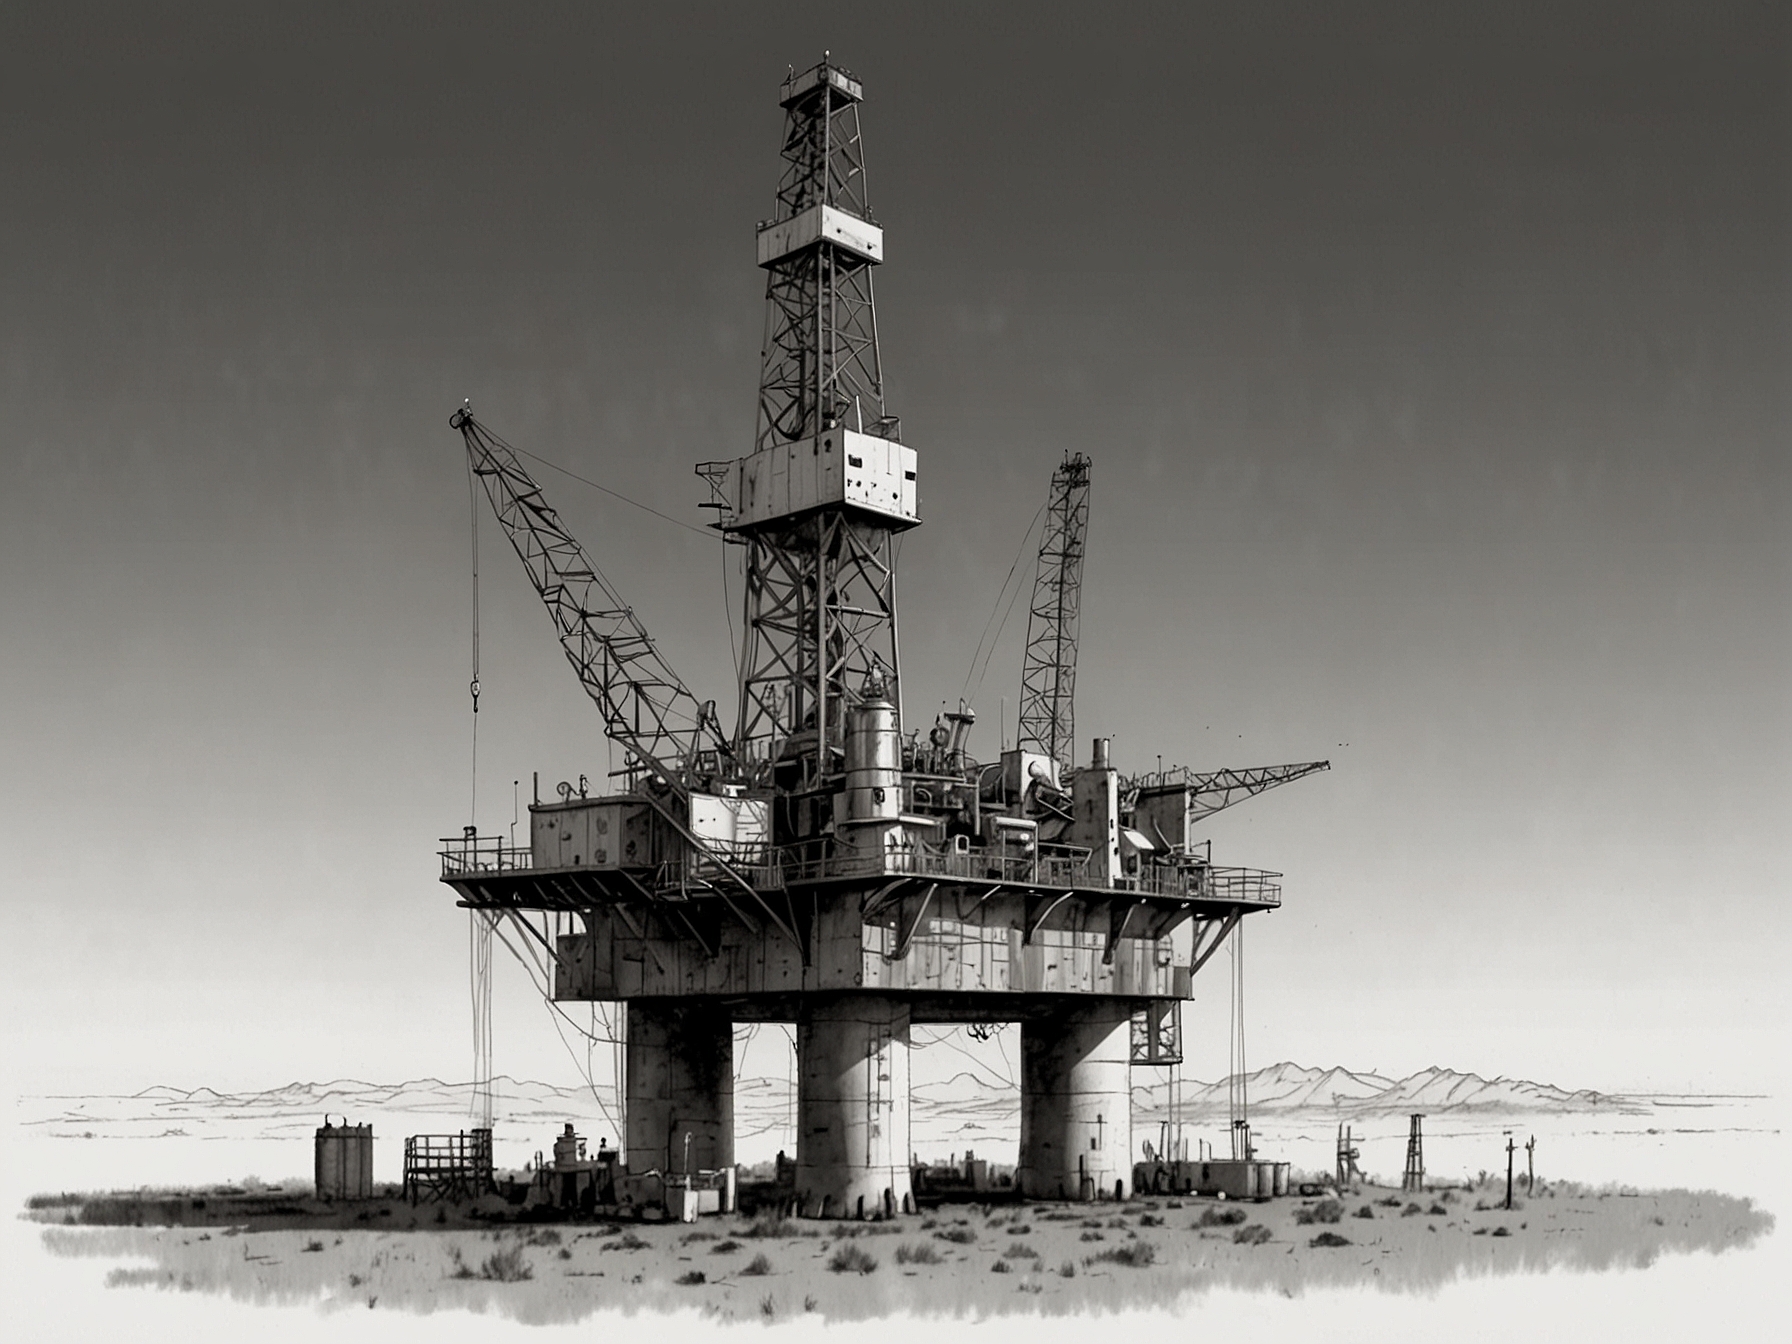 A drilling rig with Occidental Petroleum's logo, symbolizing the company's strategic focus on technological innovation and sustainable practices in oil and gas exploration.